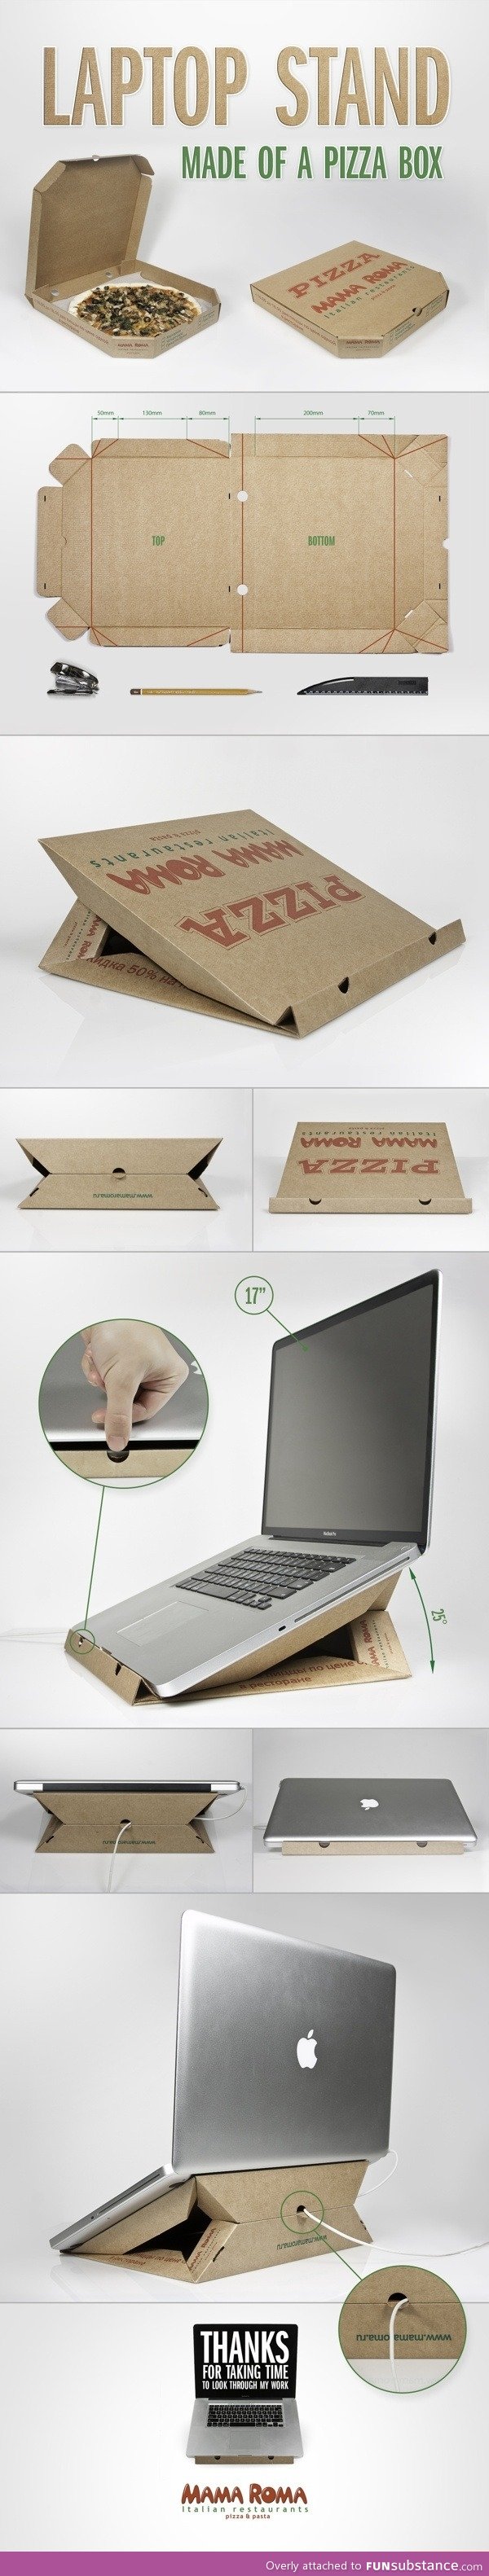 Laptop stand made of a pizza box